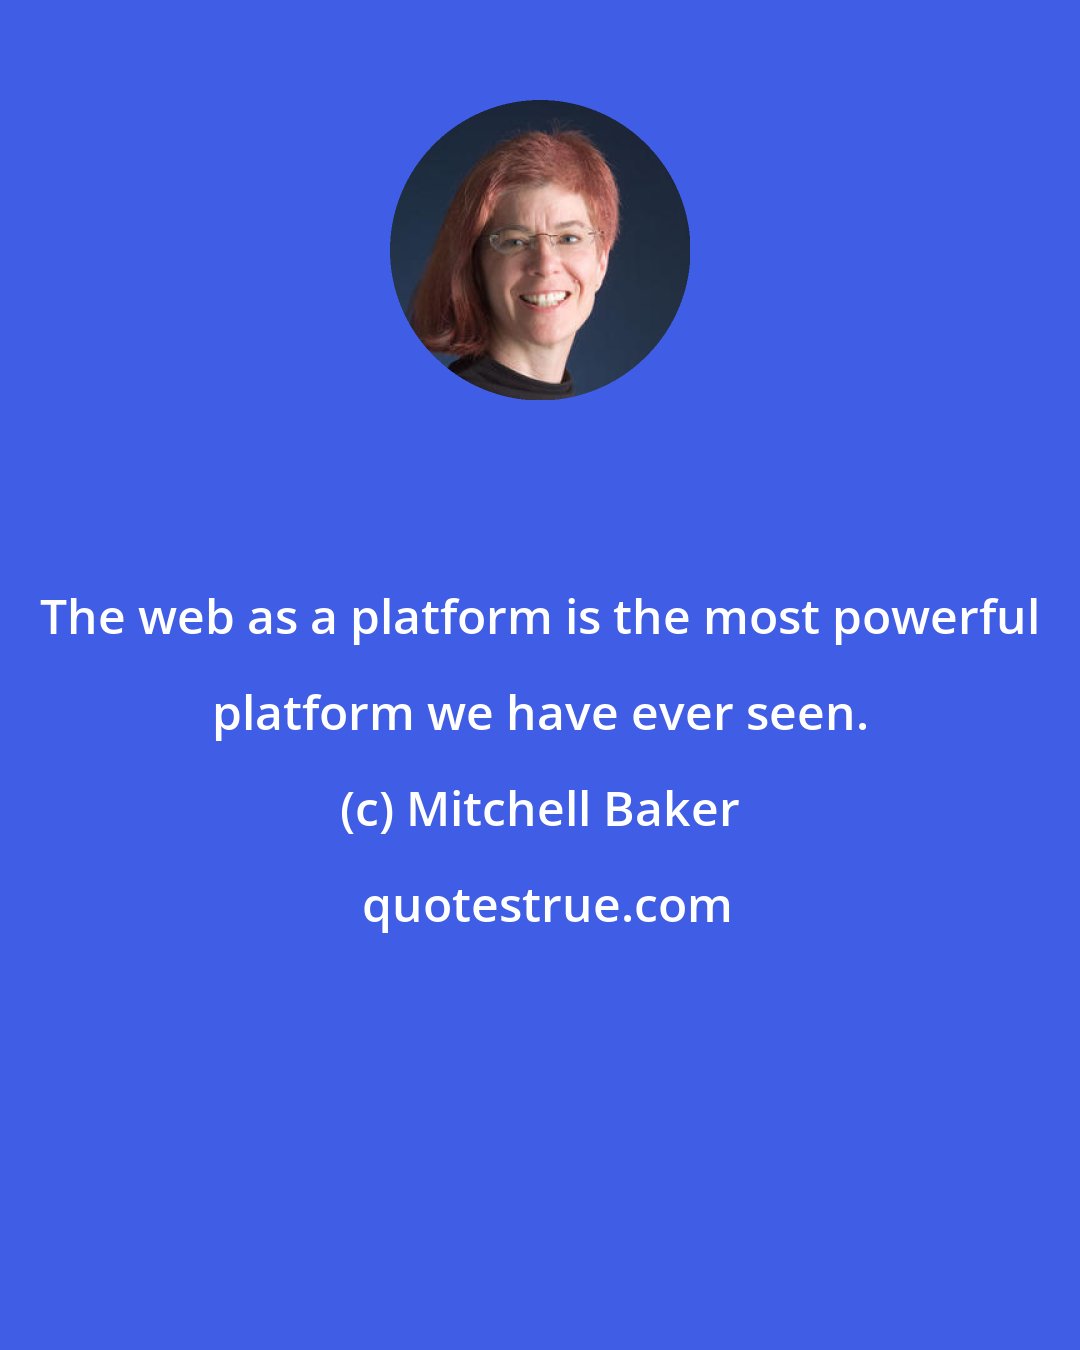 Mitchell Baker: The web as a platform is the most powerful platform we have ever seen.